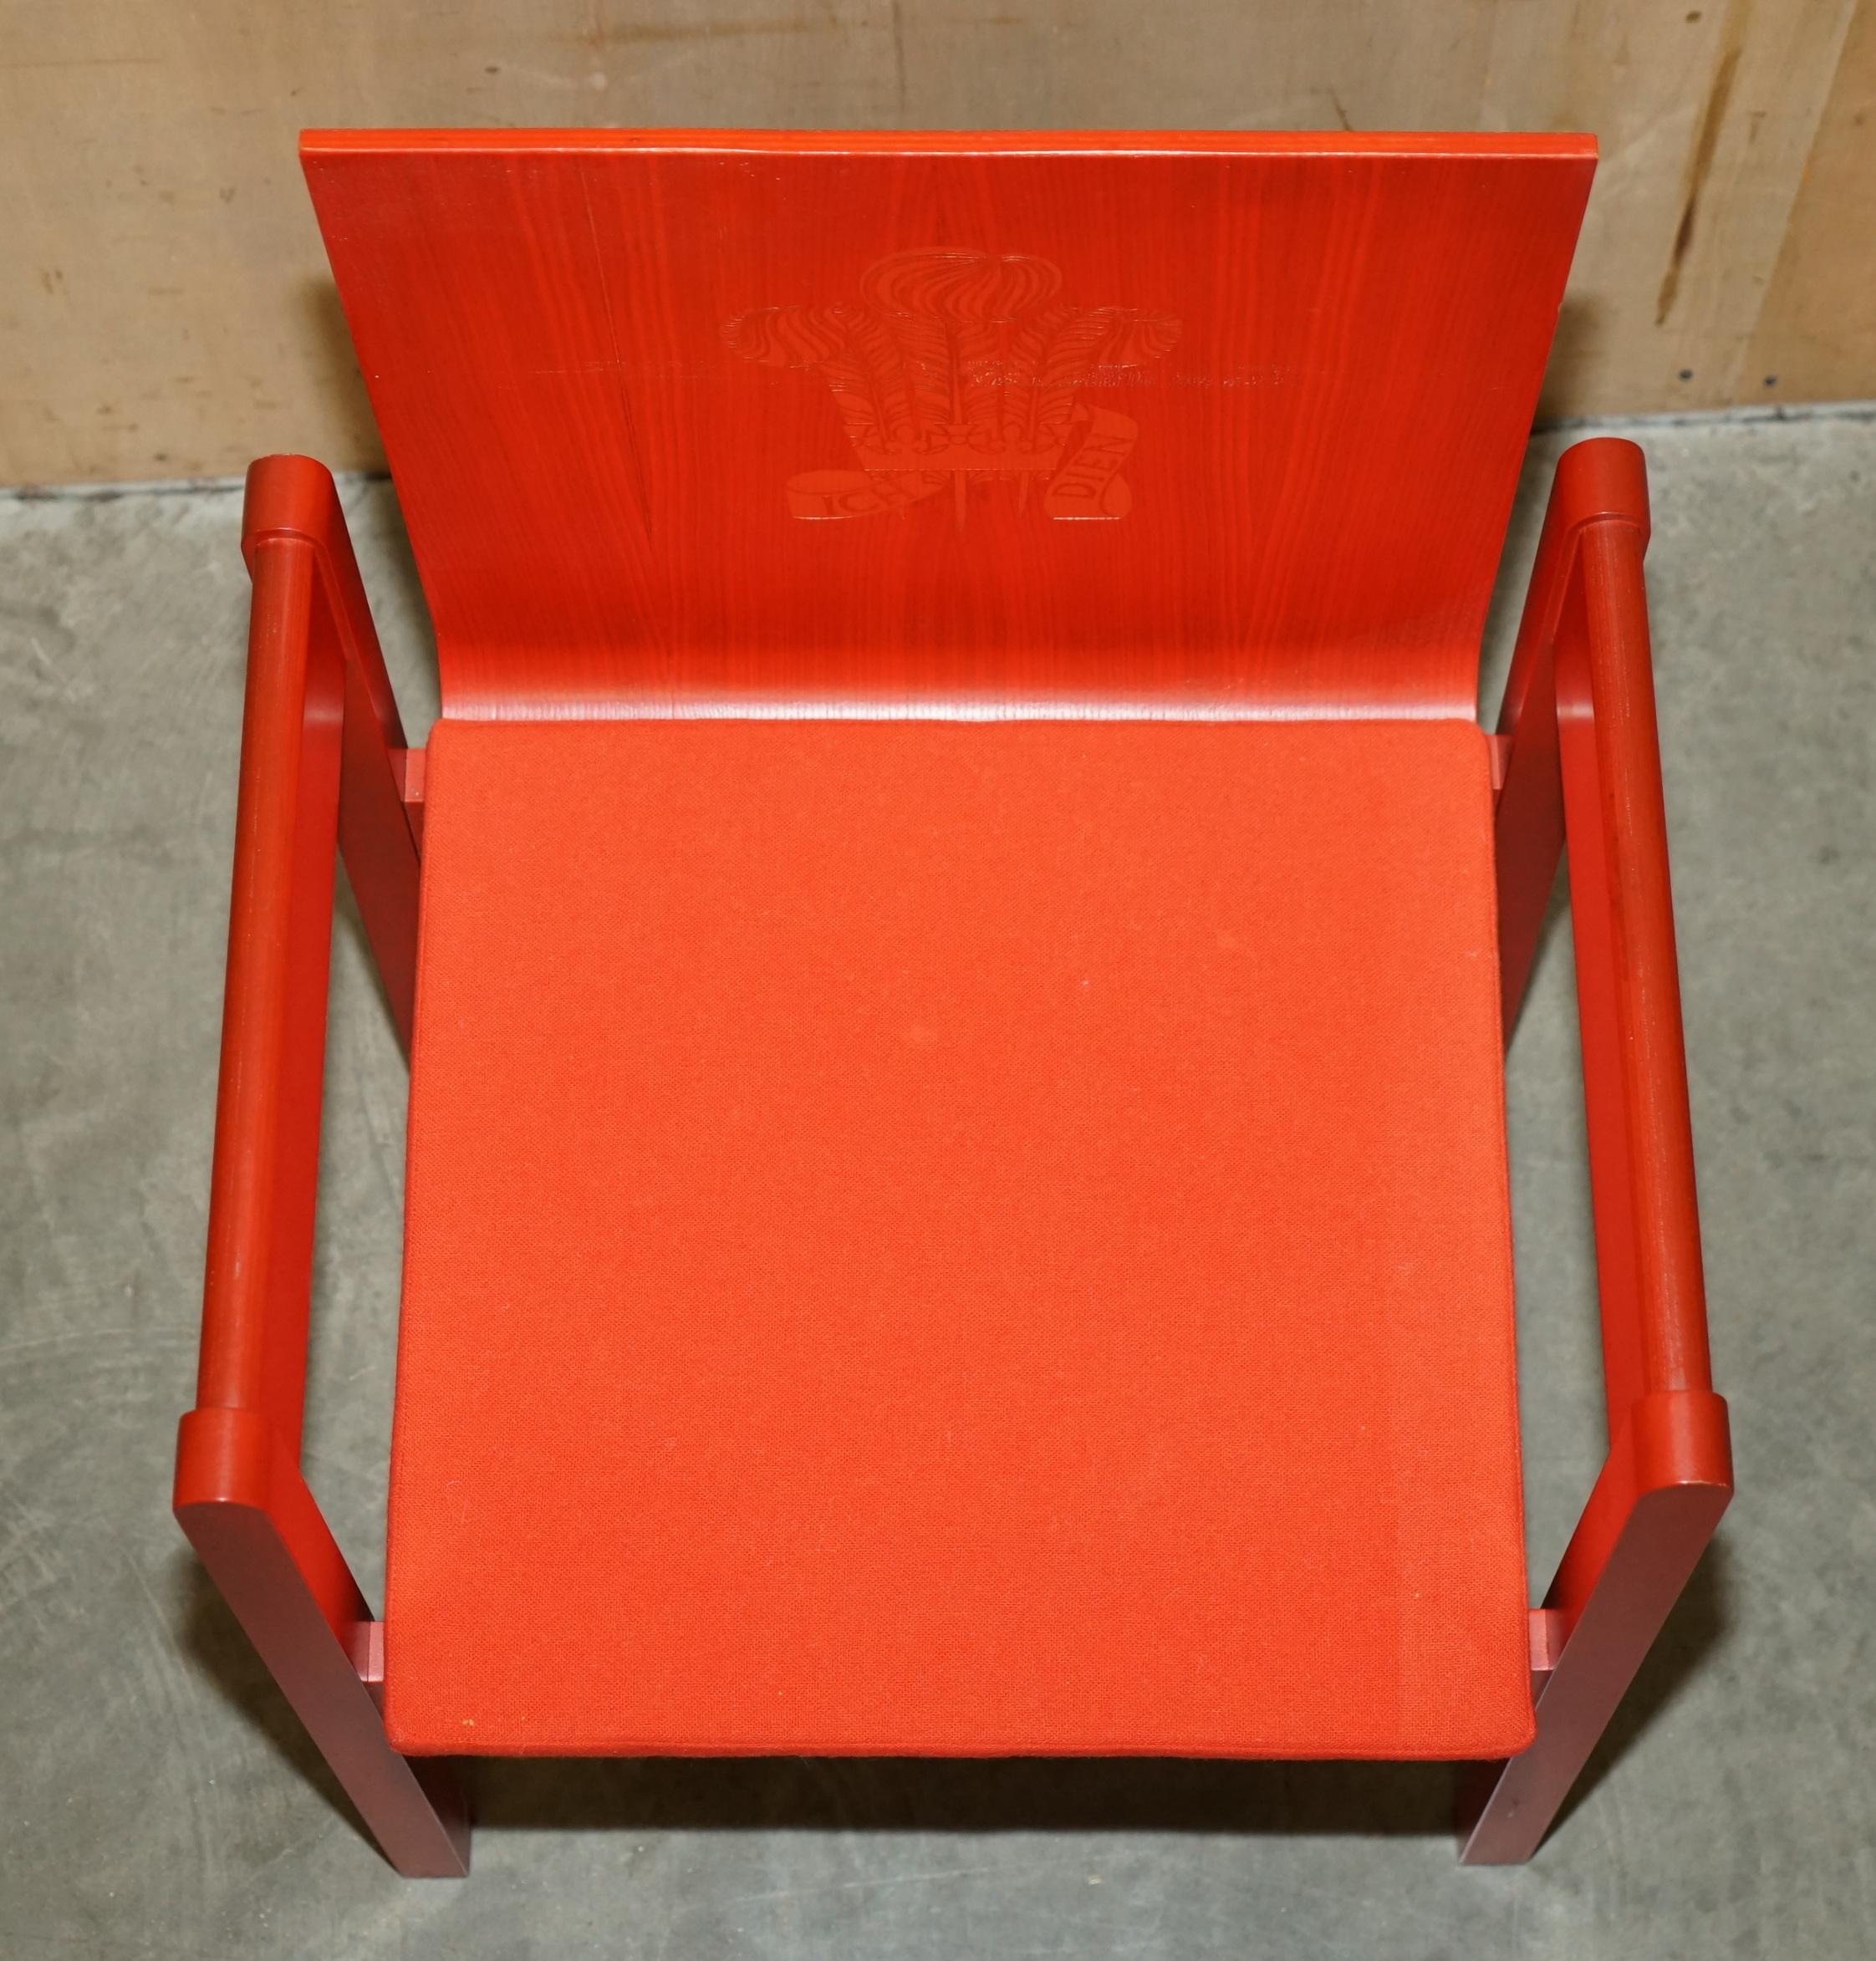 LAST OF ITS KIND BRAND NEW IN THE BOX 1969 PRINCE CHARLES INVESTITURE ARMCHAiR For Sale 10